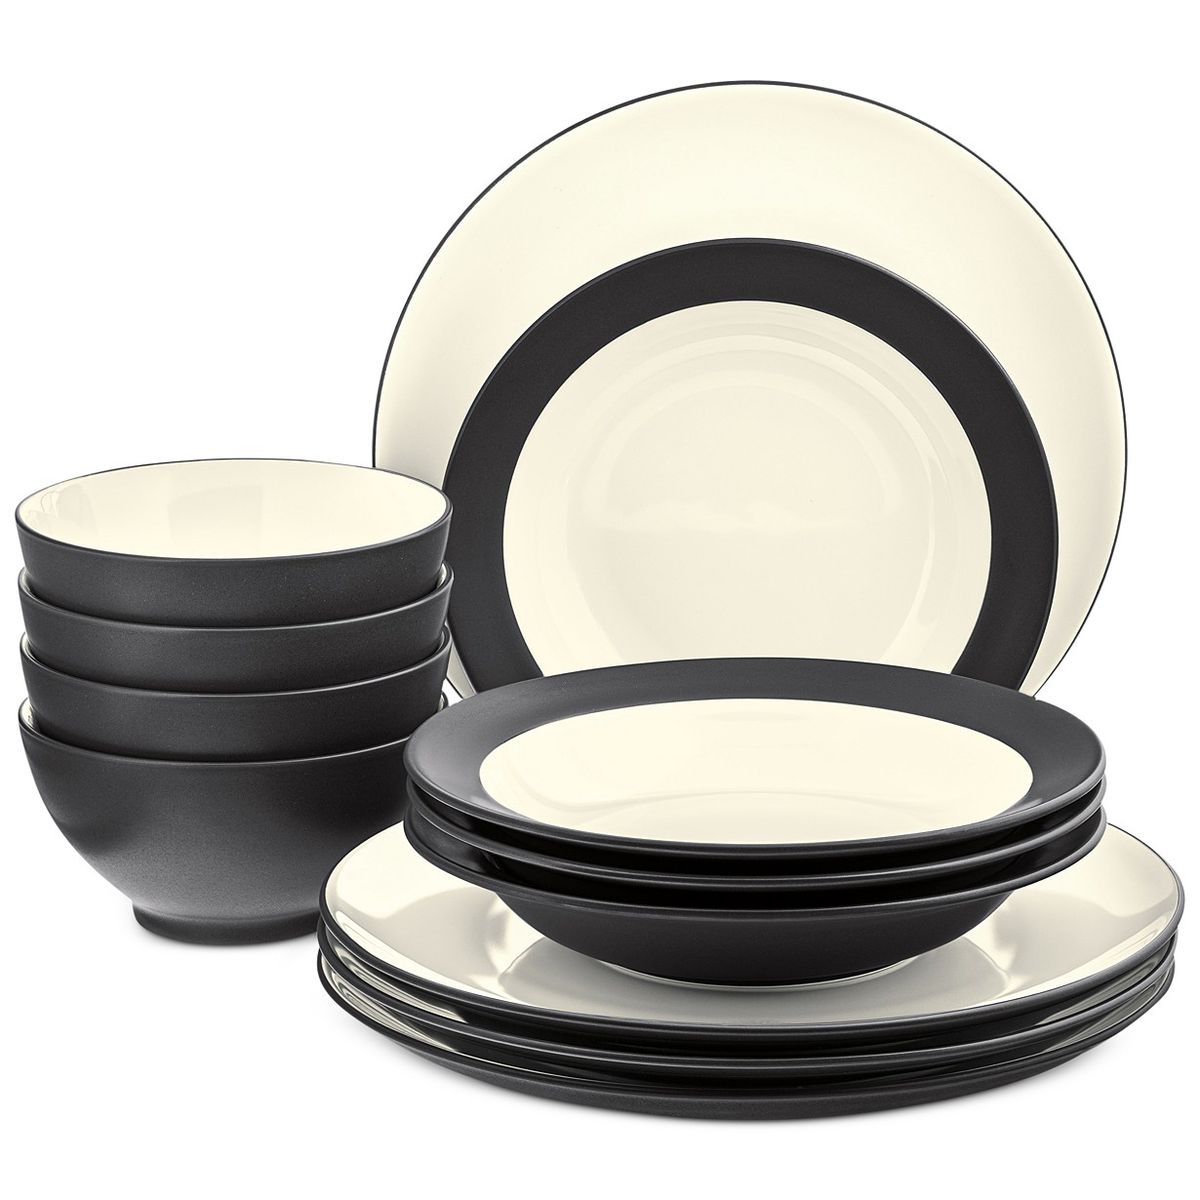 A stack of plates and bowls with black rims. 